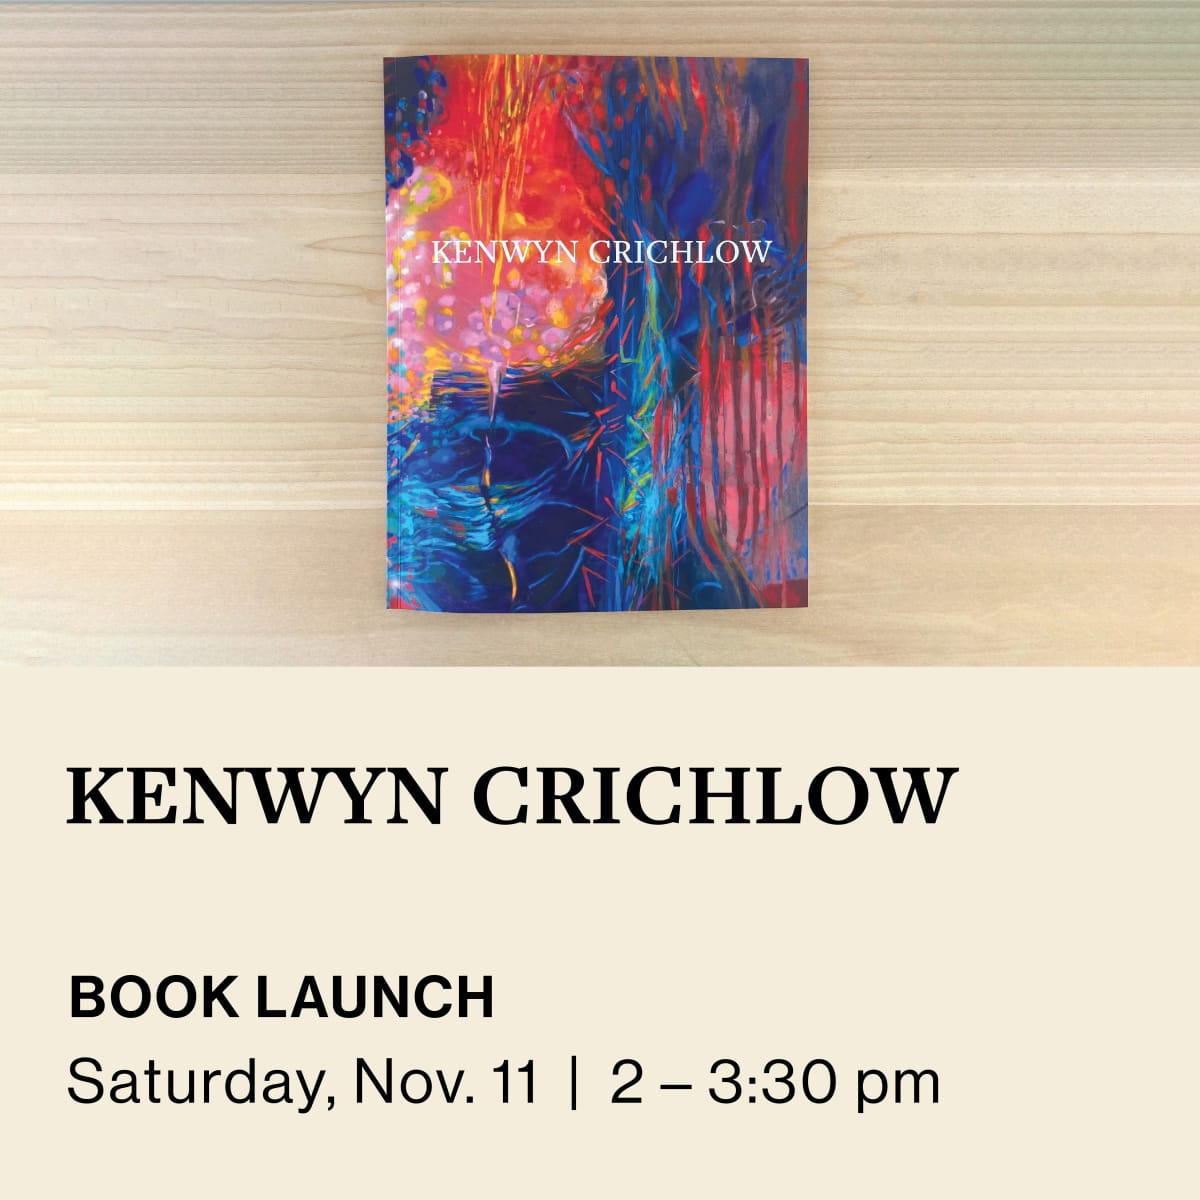 EVENT: BOOK LAUNCH 